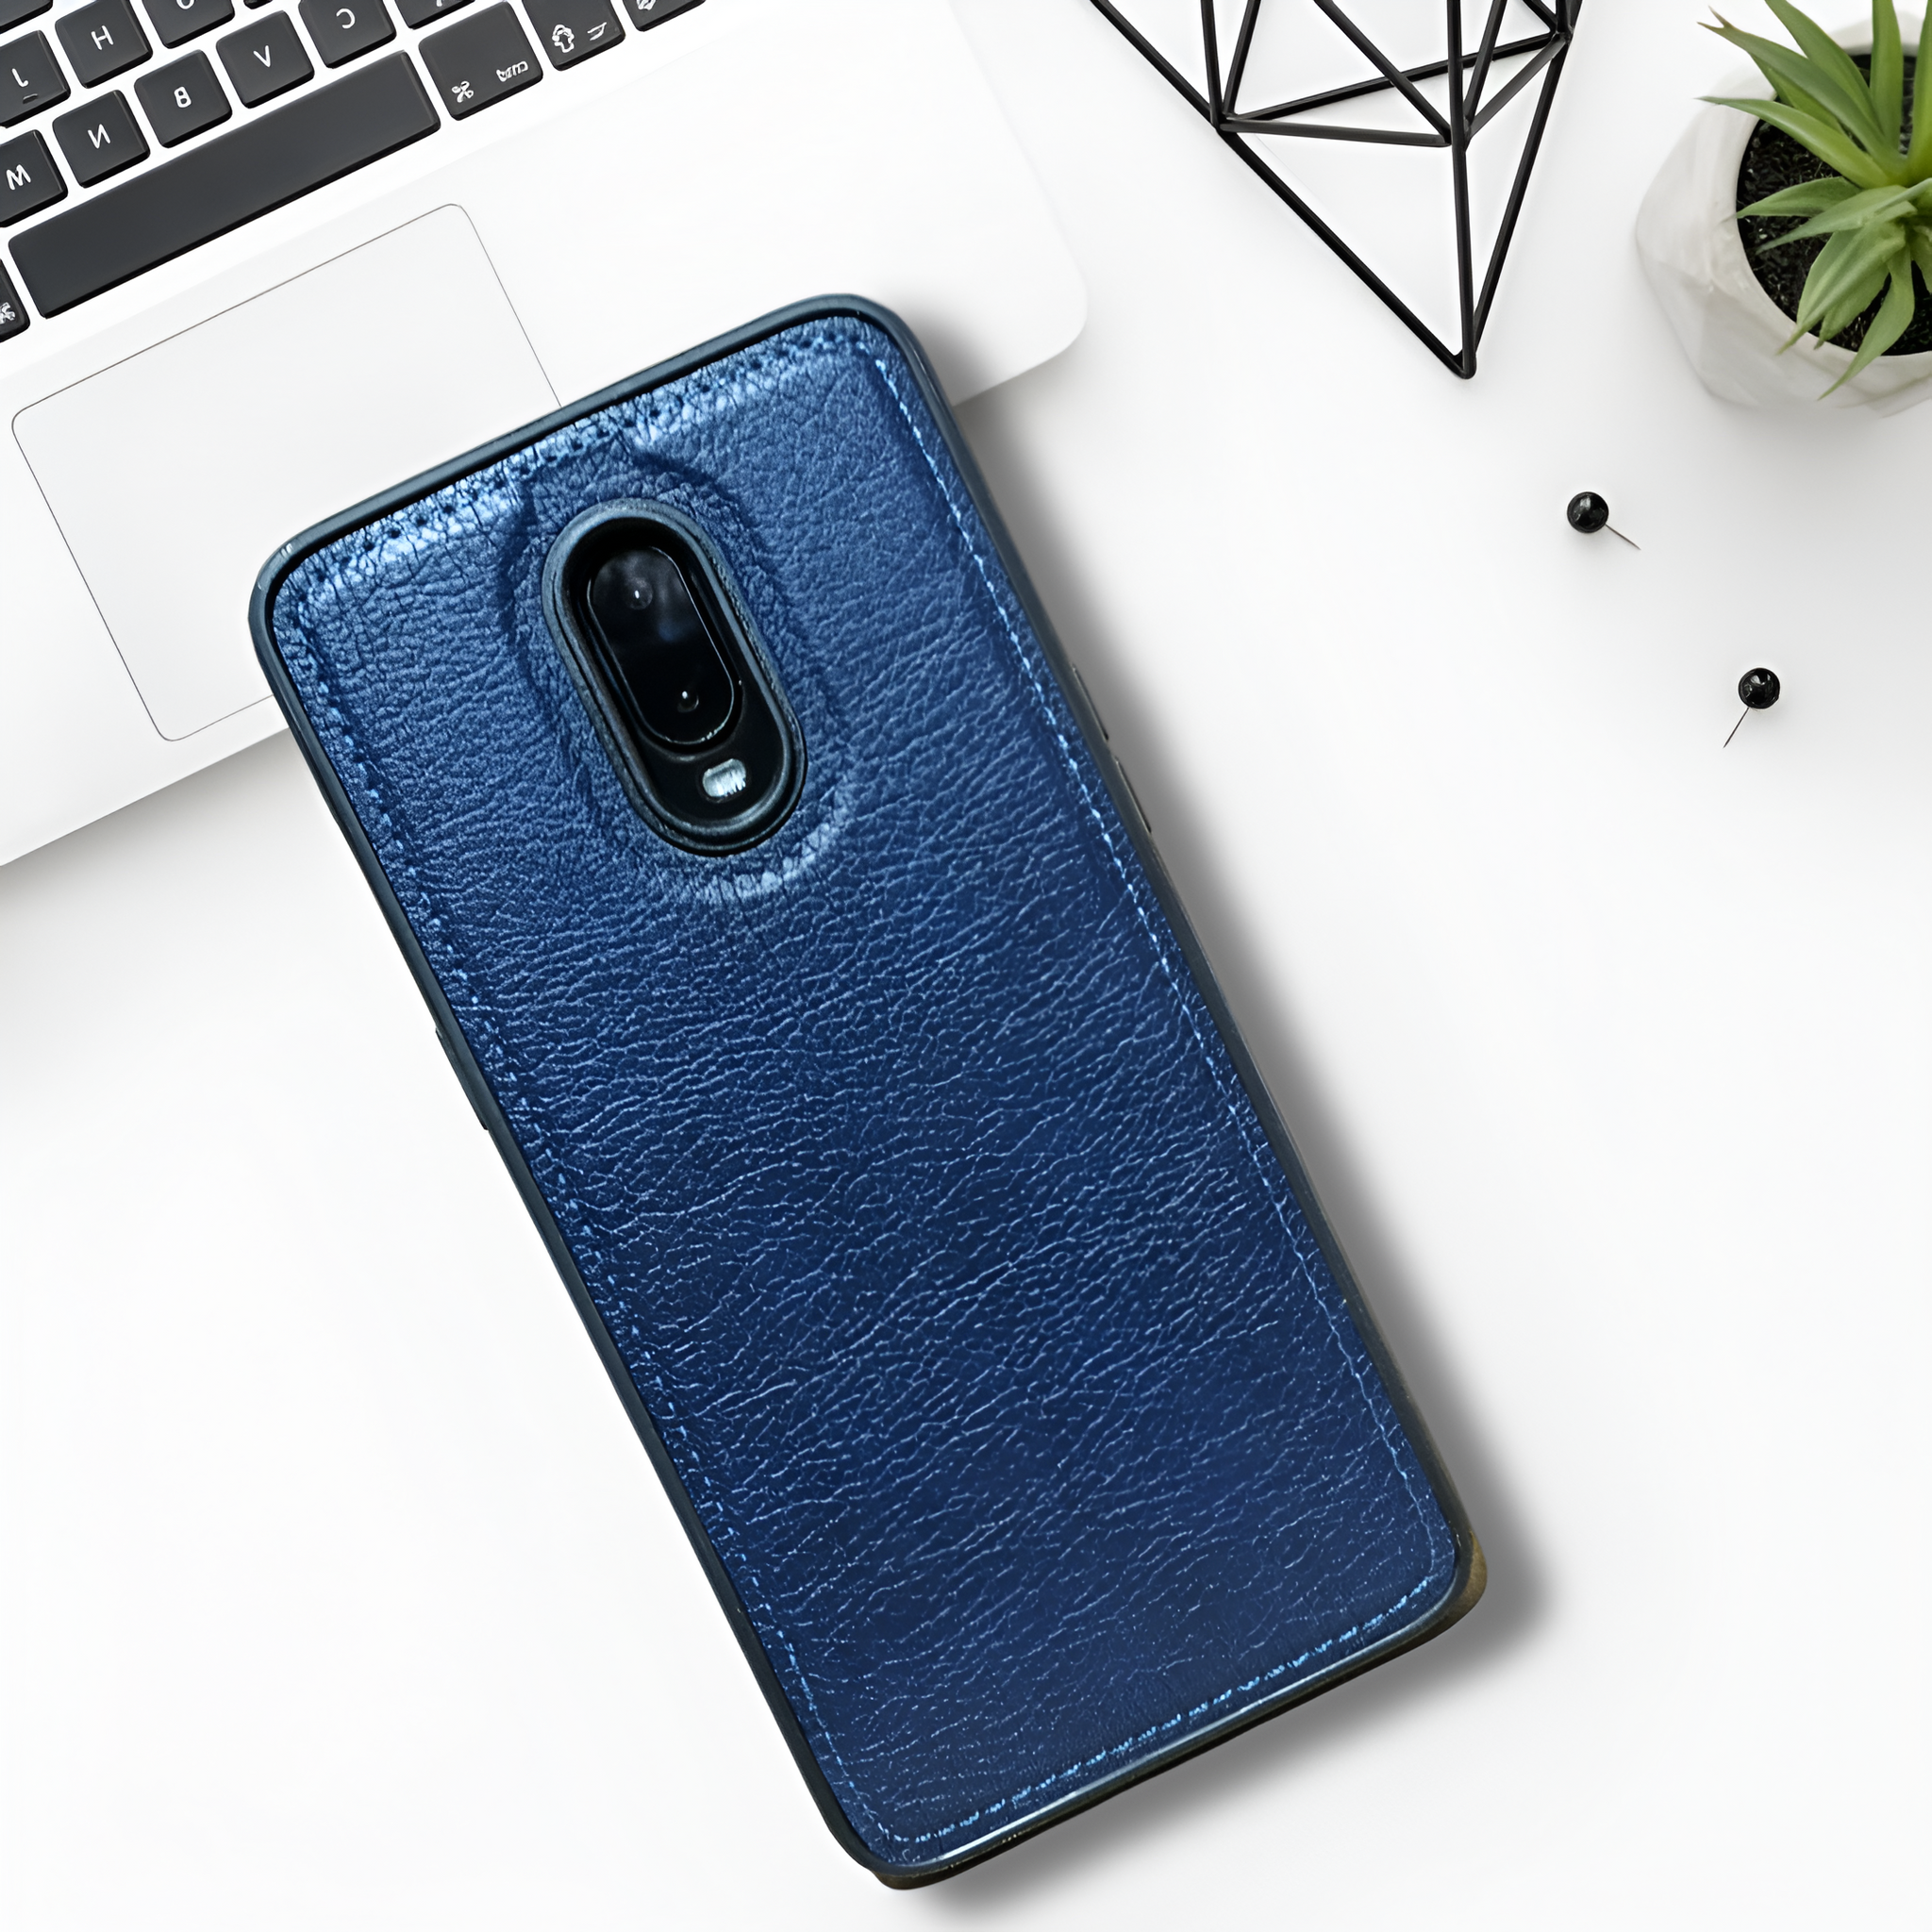 Puloka Dark Blue Leather Case for Oneplus 7